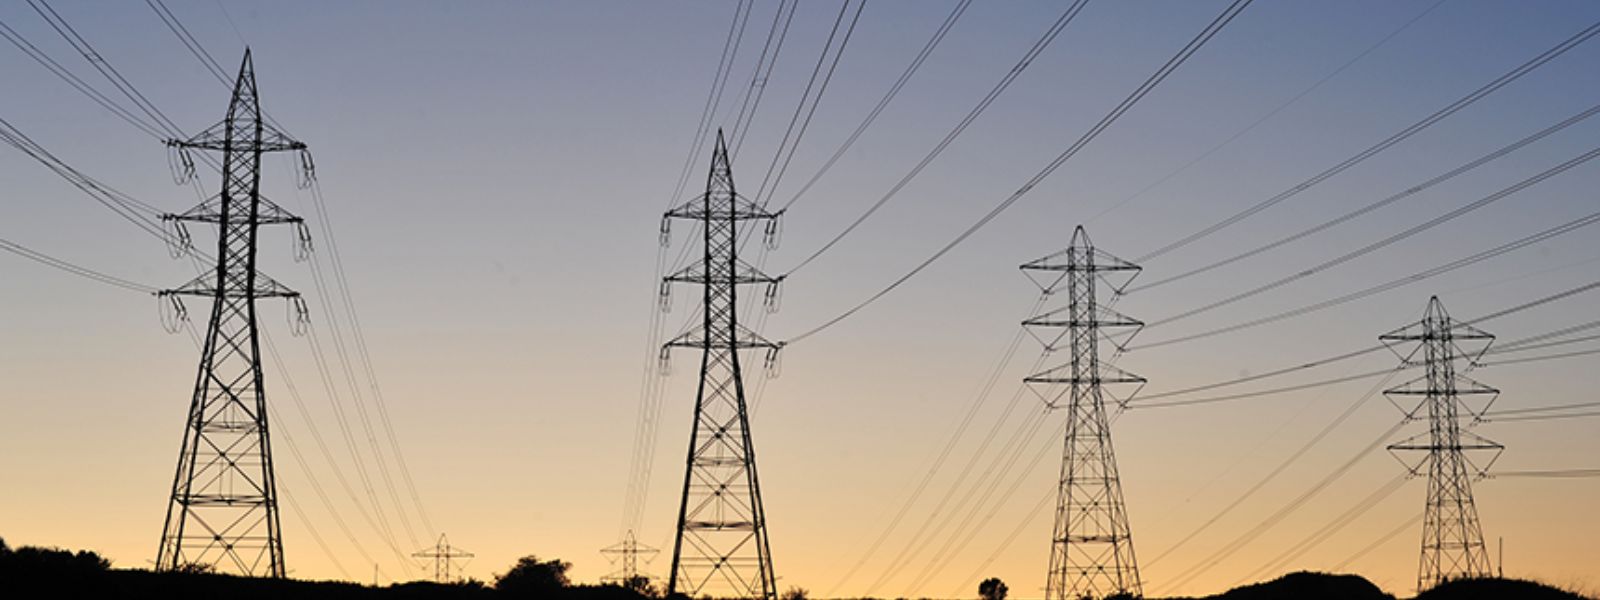 Sri Lanka to prioritize integration of power grids with India by 2030